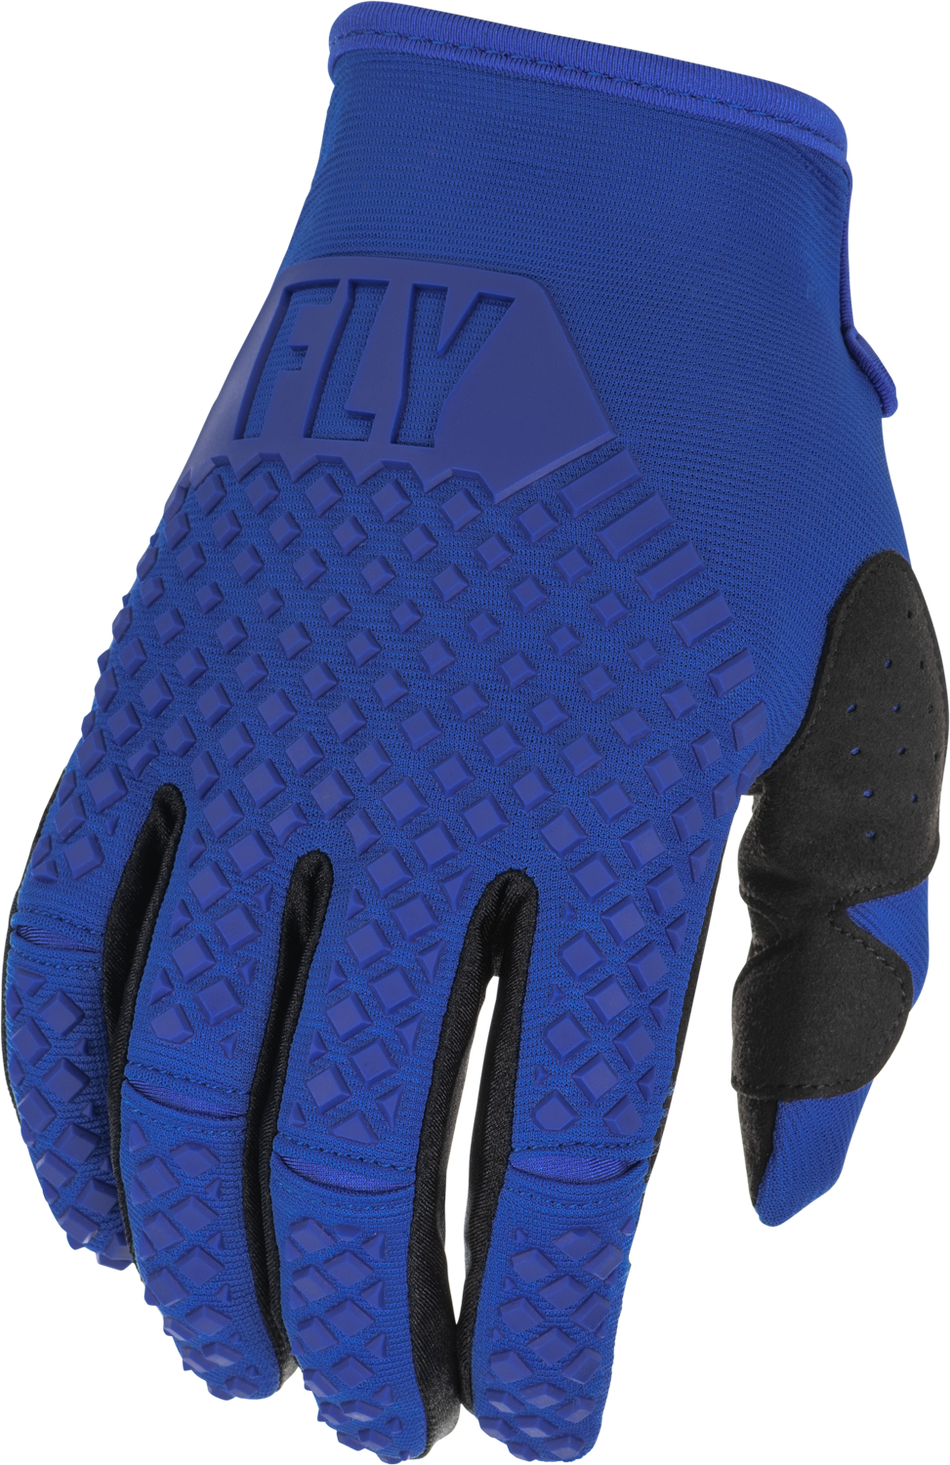 FLY RACING Kinetic Gloves Blue 2x 375-4112X